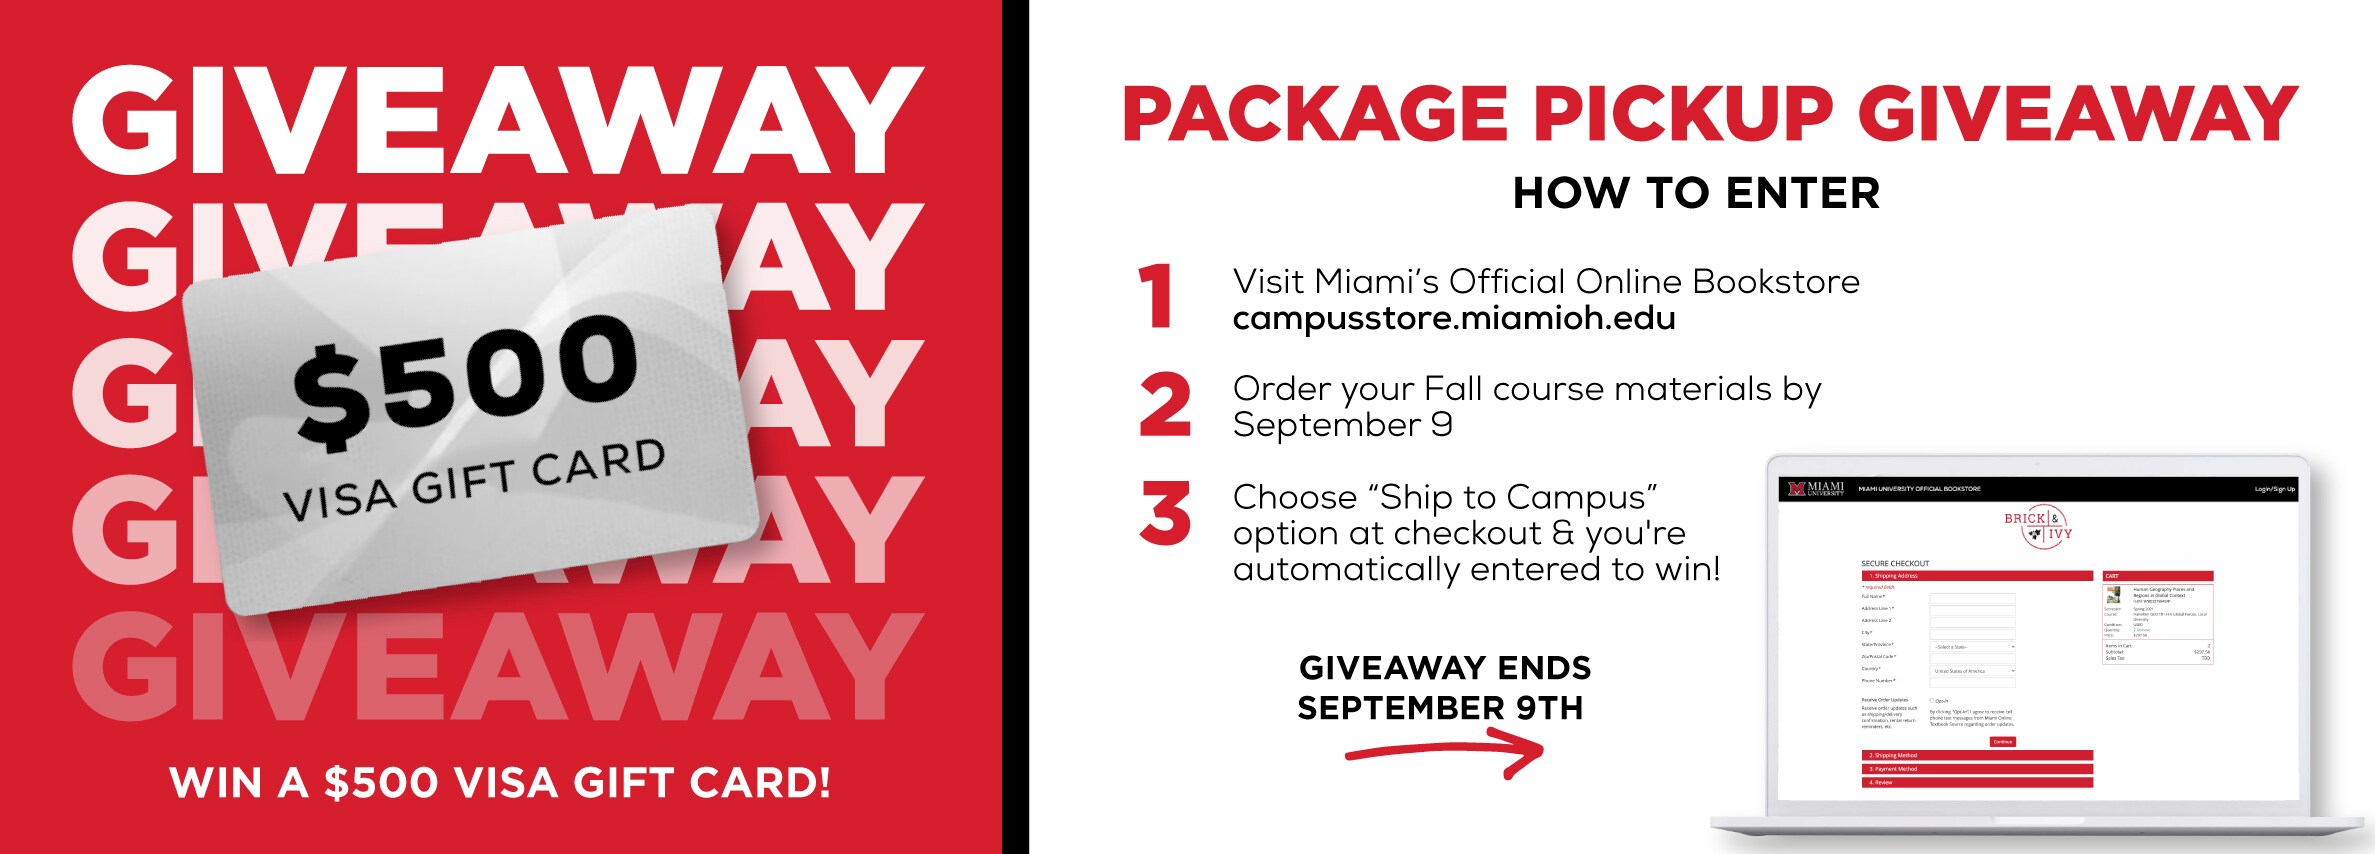 Giveaway - Win a $500 Visa Gift Card. How to Enter: Order books by Sept. 9 and choose Ship to Campus. Package Pickup Giveaway ends September 9th.